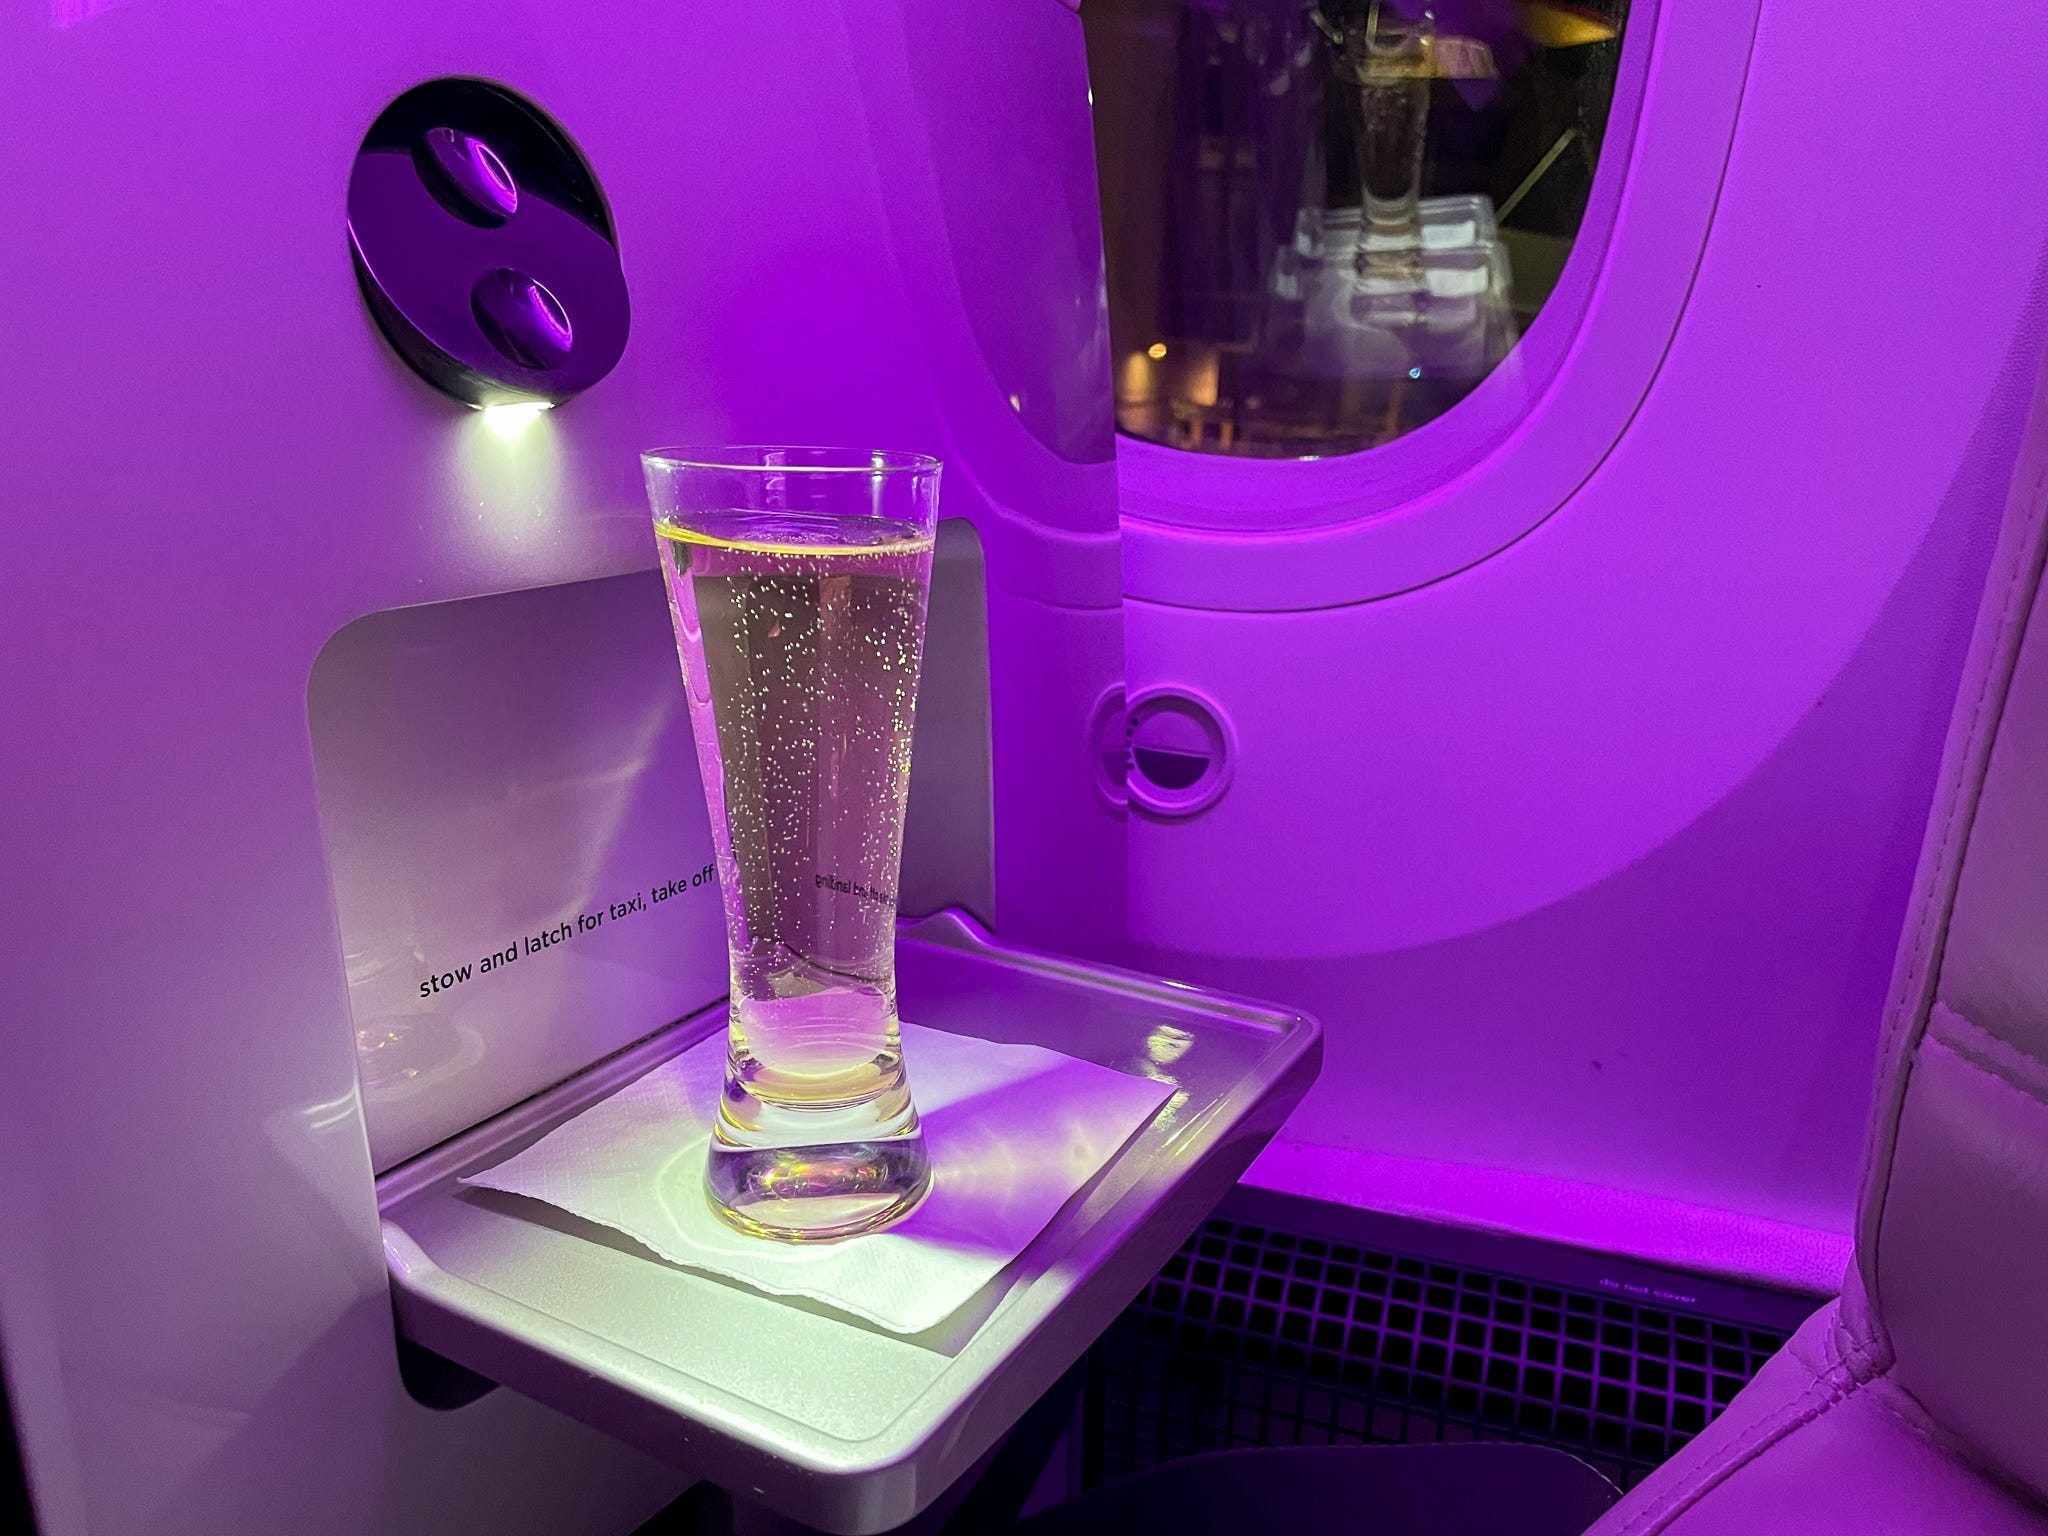 <p>As I boarded the Boeing aircraft, a flight attendant asked if I would like a glass of Champagne or something to drink before takeoff.</p><p>I'm used to a smiling flight attendant handing me a sanitizing wipe when I've boarded — not a glass of bubbly. </p><p>I happily accepted a flute. Shortly after, another flight attendant came by with a tray of roasted nuts. I quickly learned that I would never be hungry or thirsty on this flight.</p><p>I also realized that the snacks I packed in my backpack wouldn't be needed. Instead, I was part of the group I'm typically envious of: the first-class travelers who have space, snacks, and endless alcohol to enjoy on their plane ride. It was a thrilling experience, and I planned to take advantage of every perk. </p>